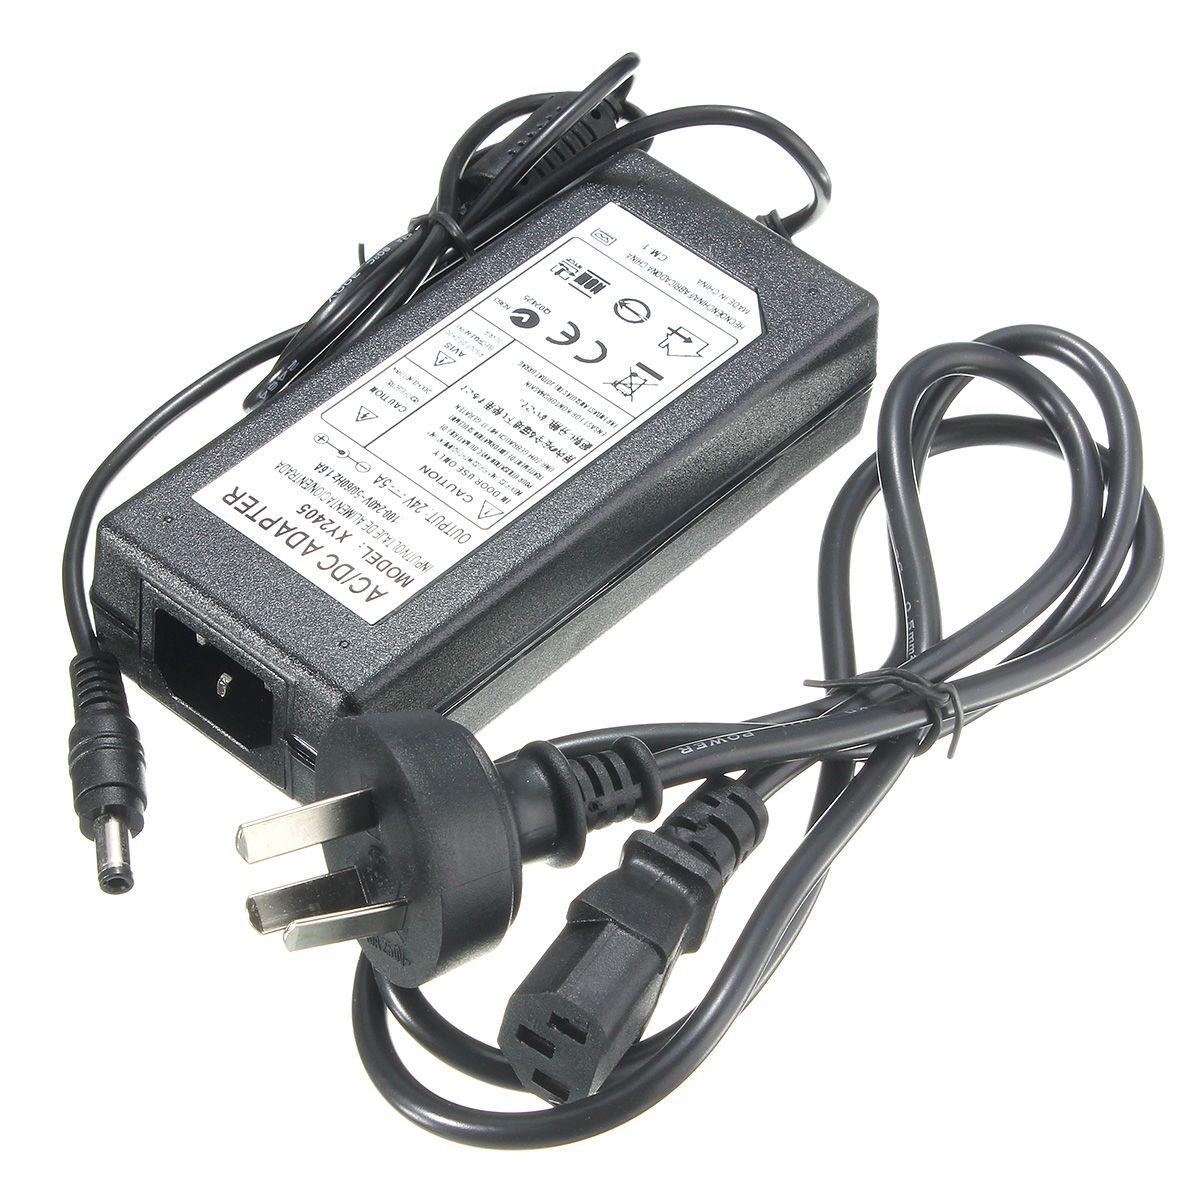 AC85-240V-to-DC24V-5A-Power-Supply-Adapter-Converter-with-5521mm-Connector-for-LED-Strip-1185515